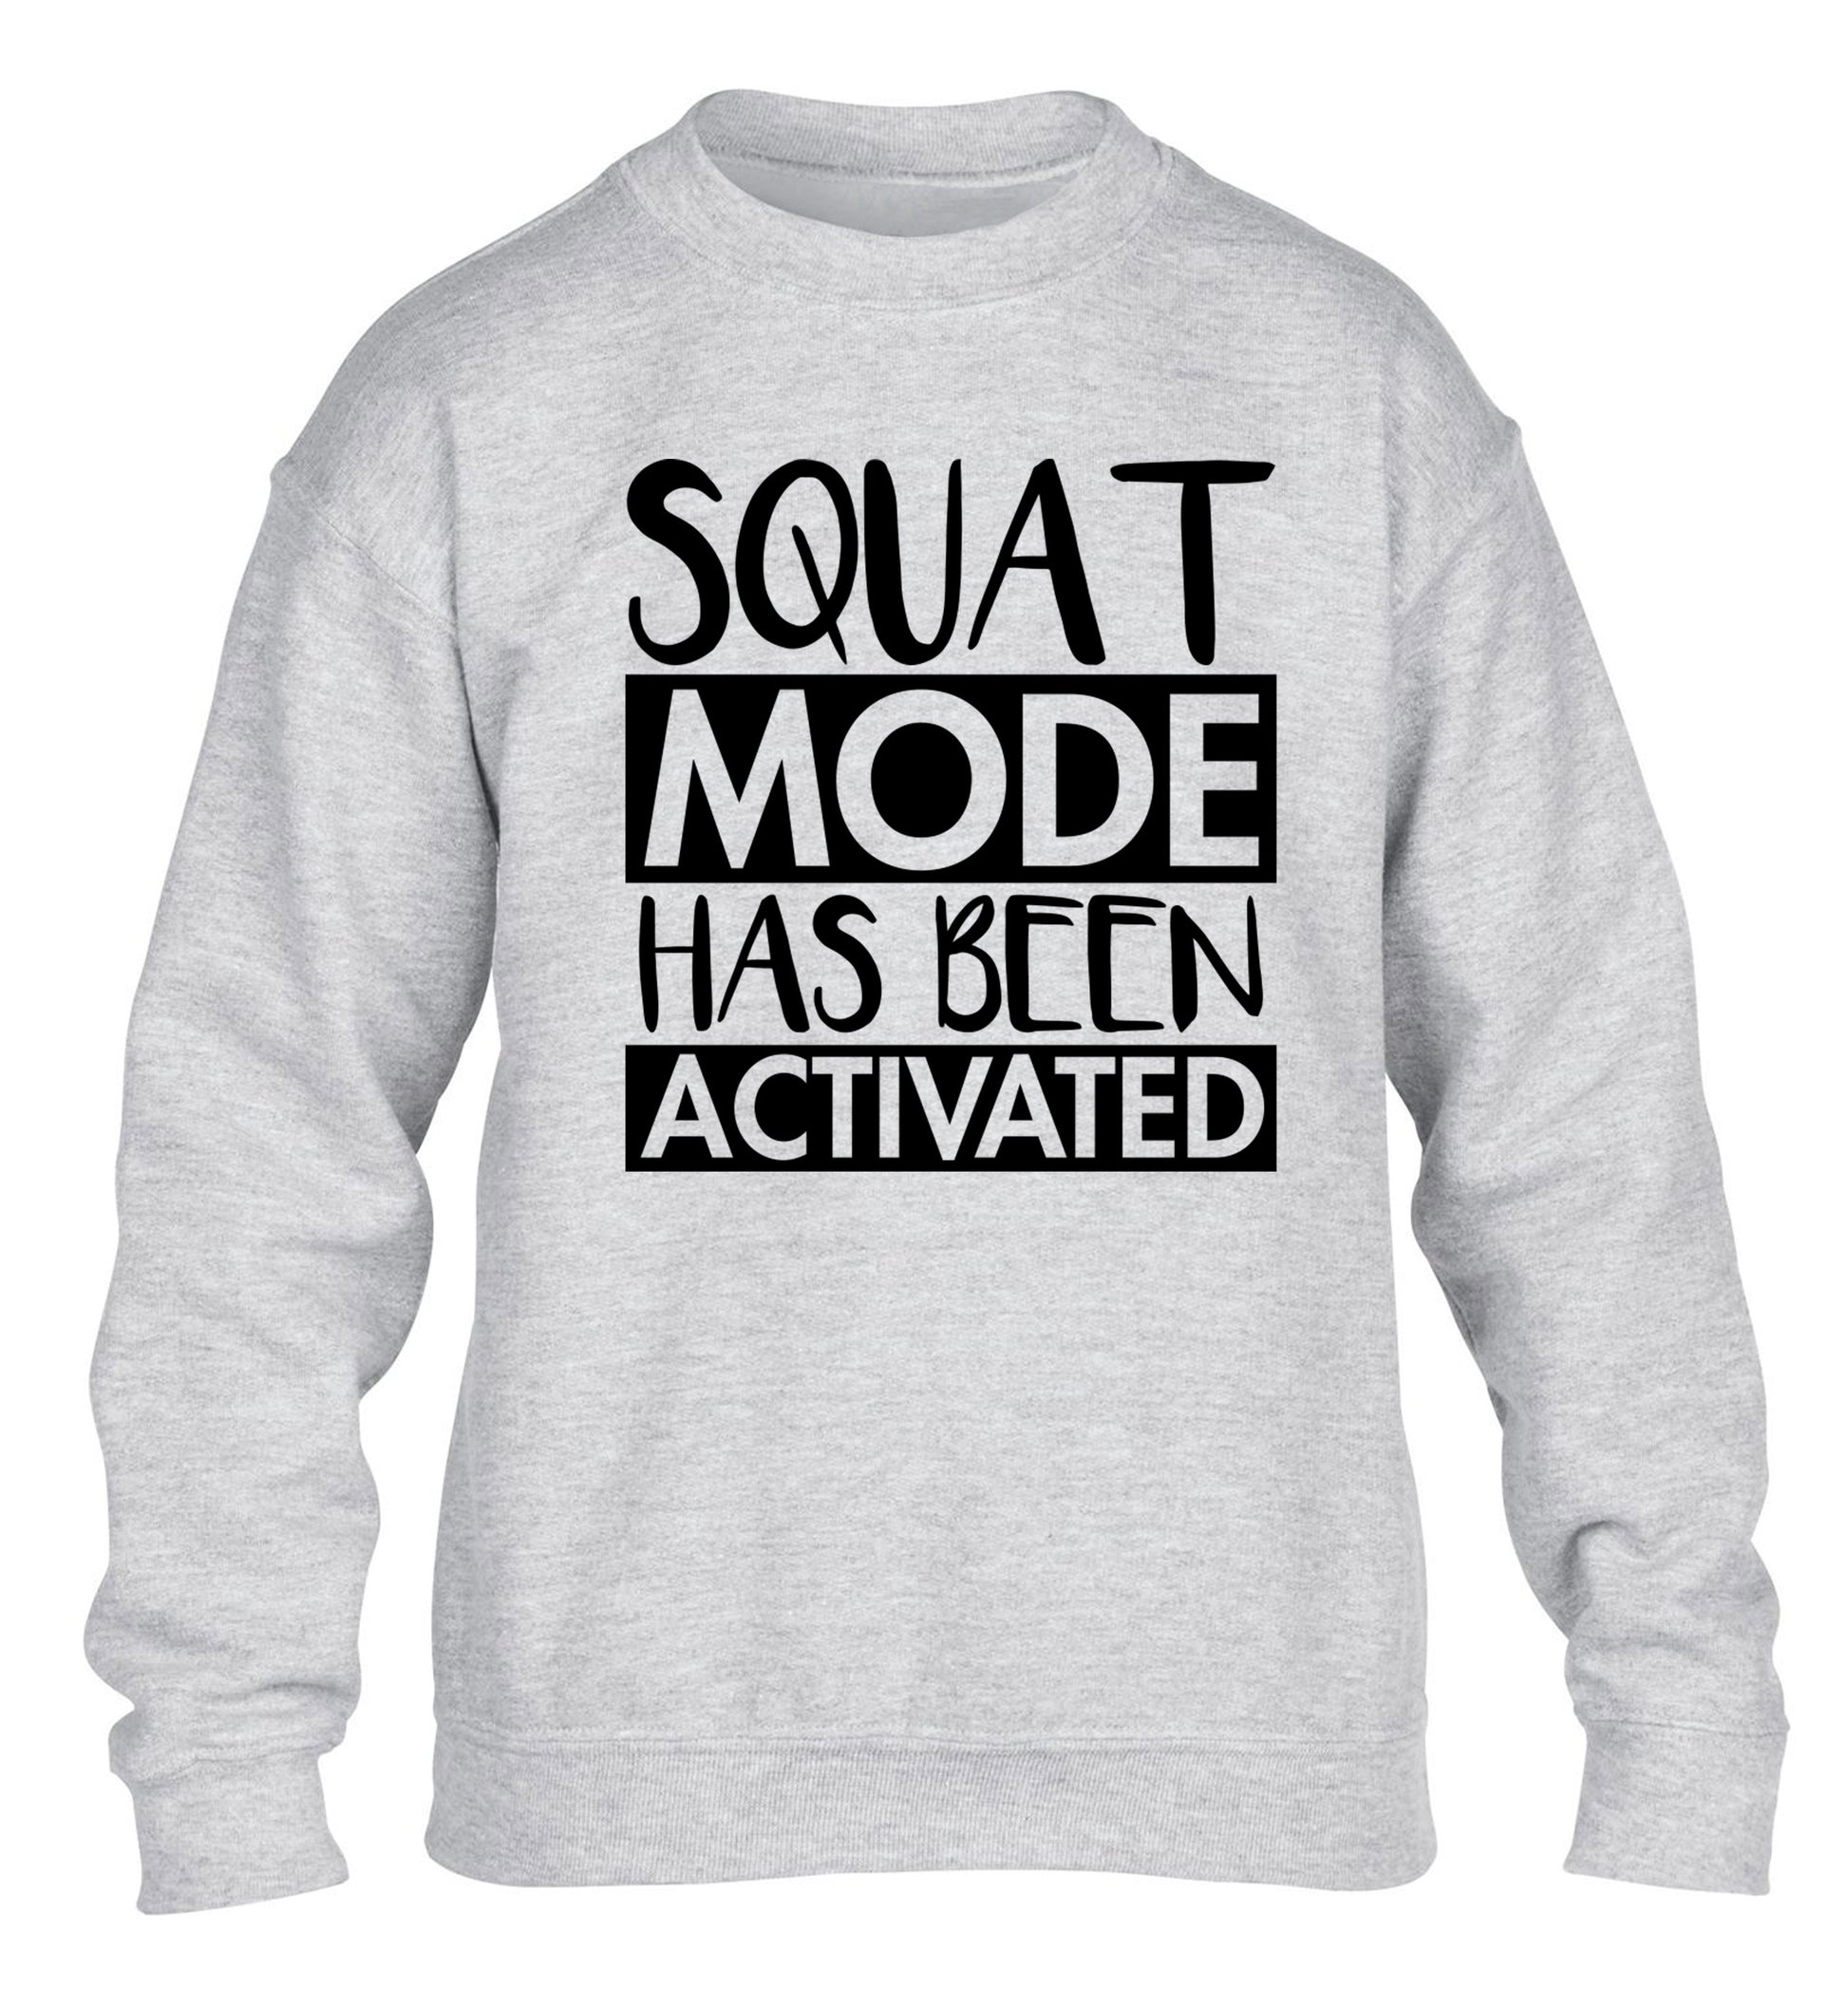 Squat mode activated children's grey sweater 12-14 Years